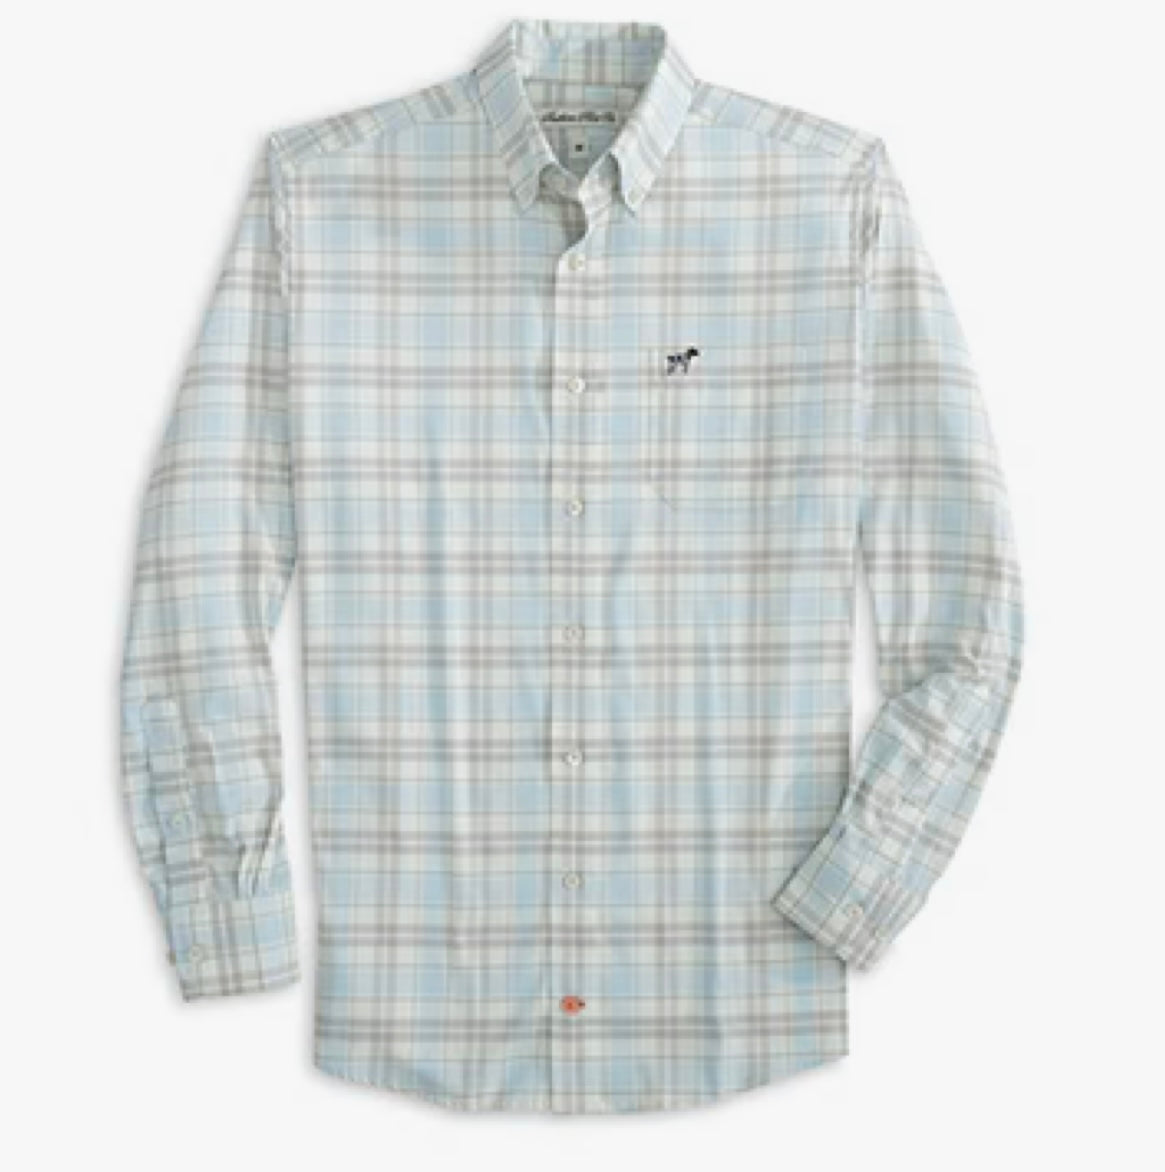 Hadley Luxe Light Button Down in Anchor Down Plaid by Southern Point Co.